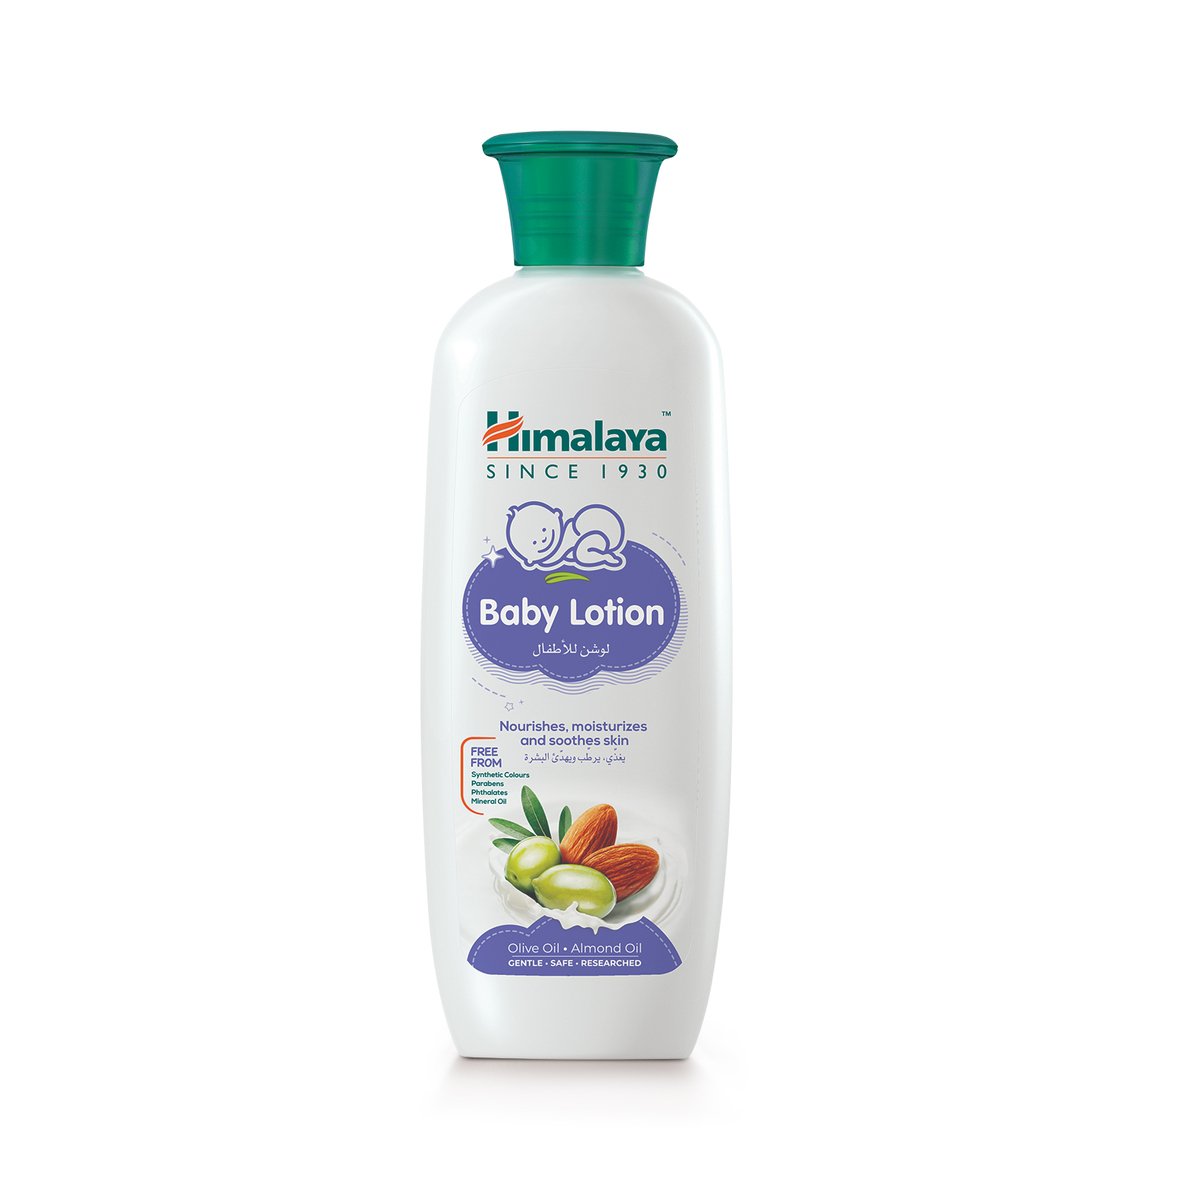 Himalaya Baby Lotion Olive Oil & Almond Oil 400 ml